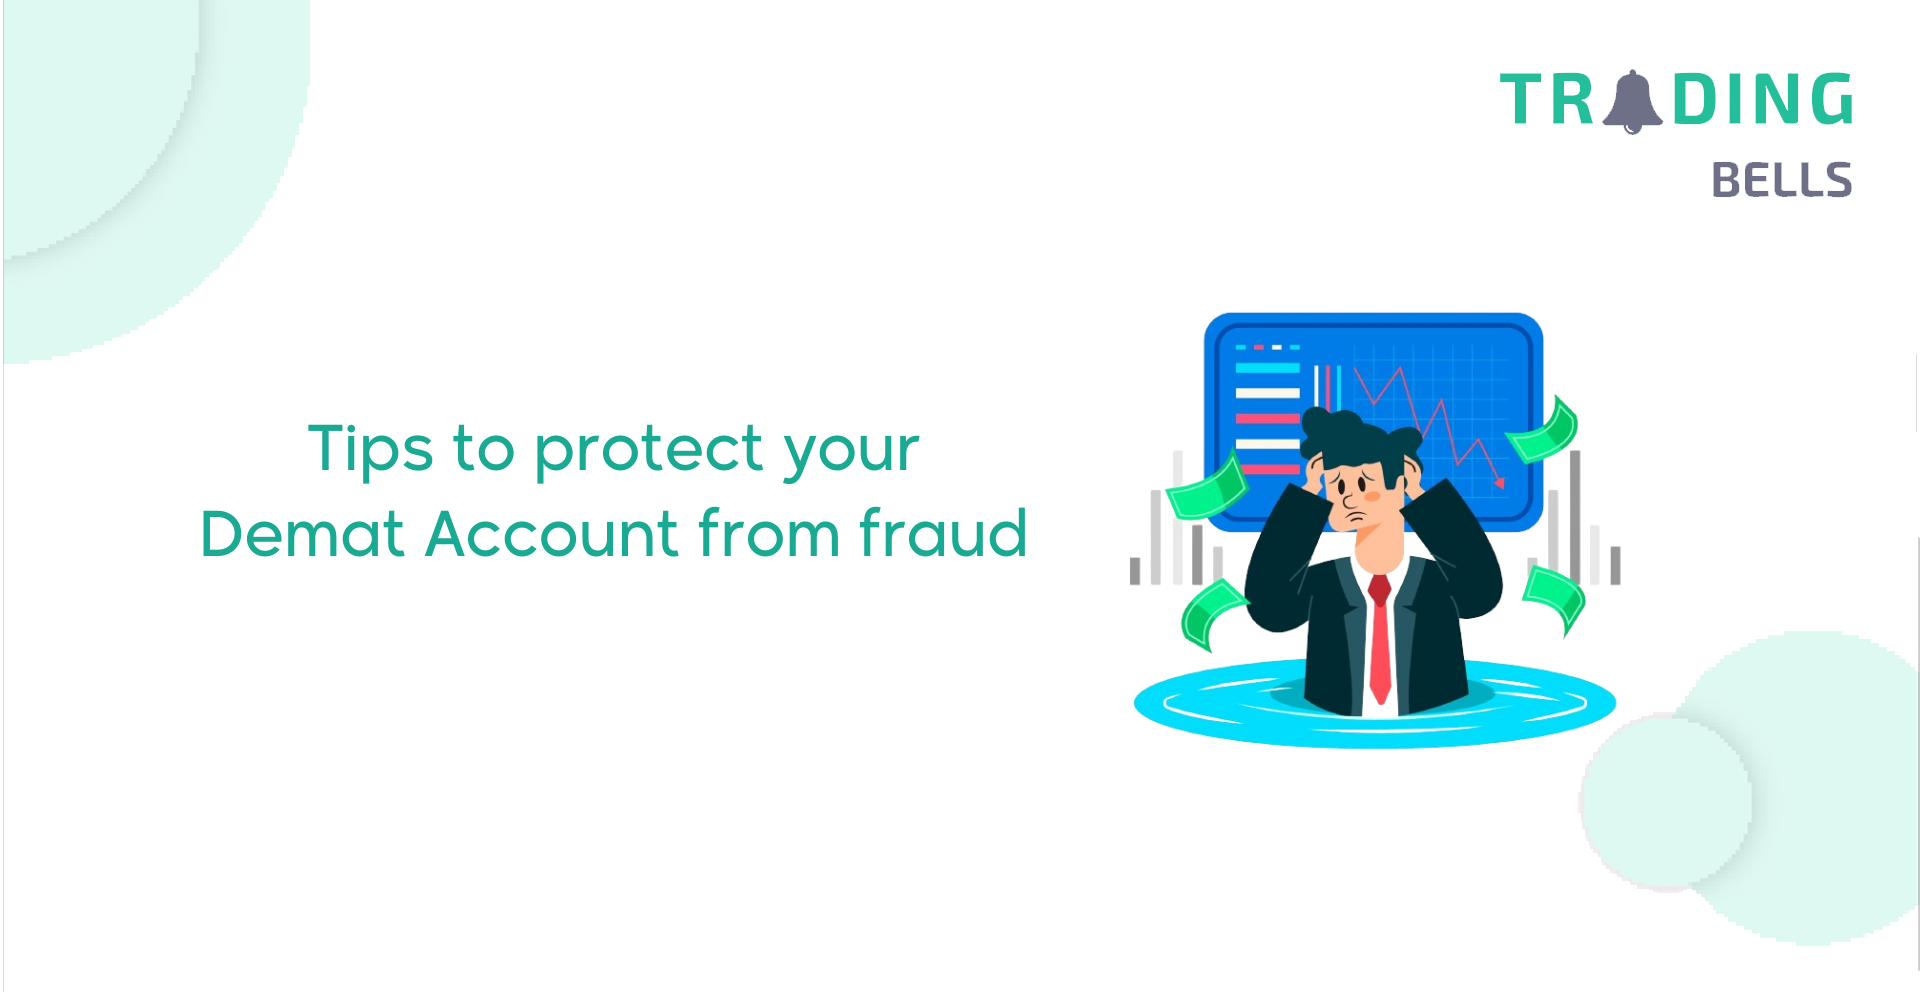 Tips to protect your Demat Account from fraud